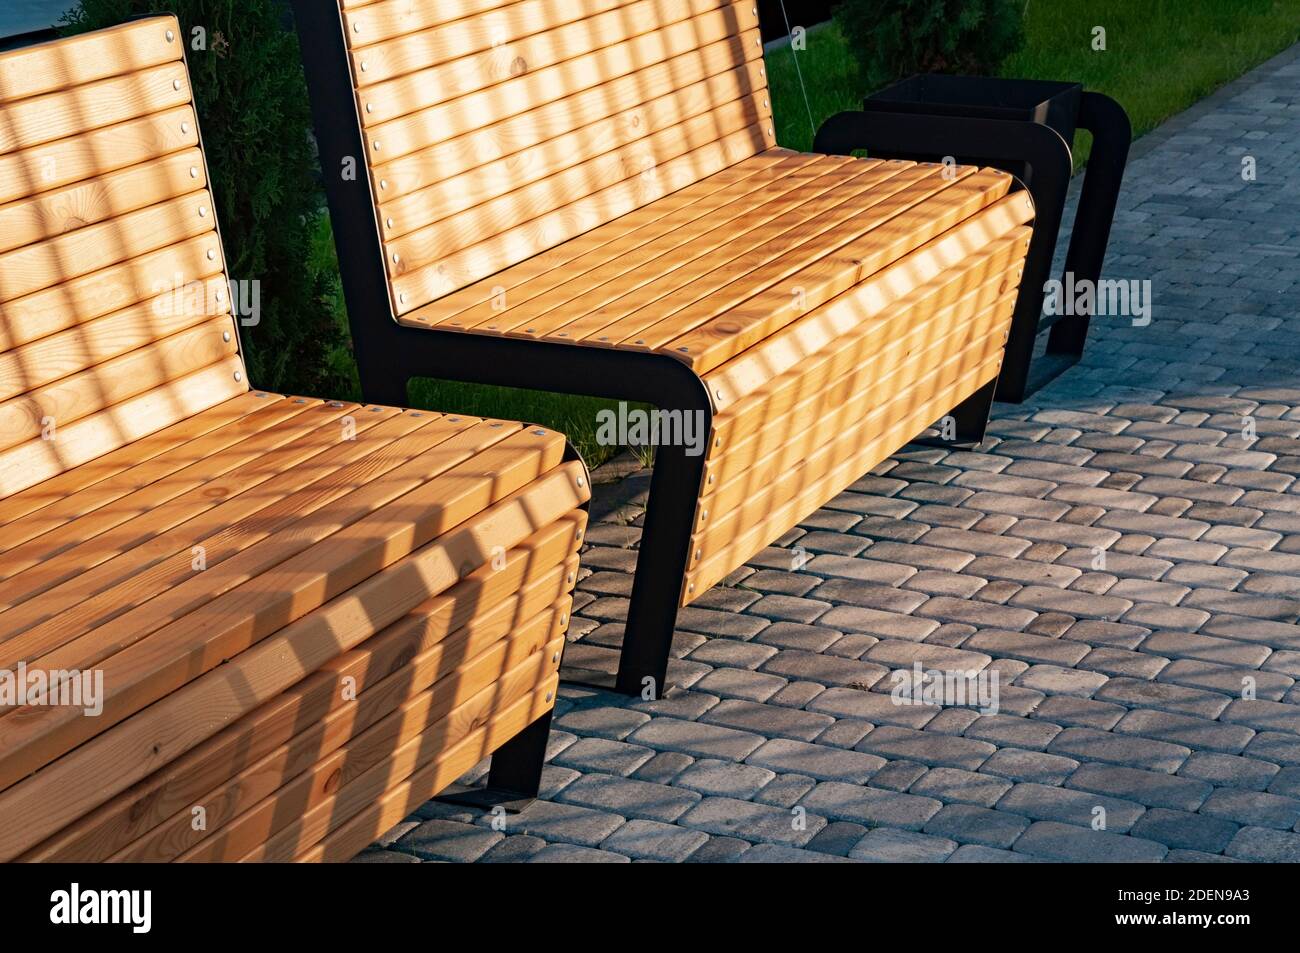 Two modern wooden benches on a cobblestone pavement Stock Photo